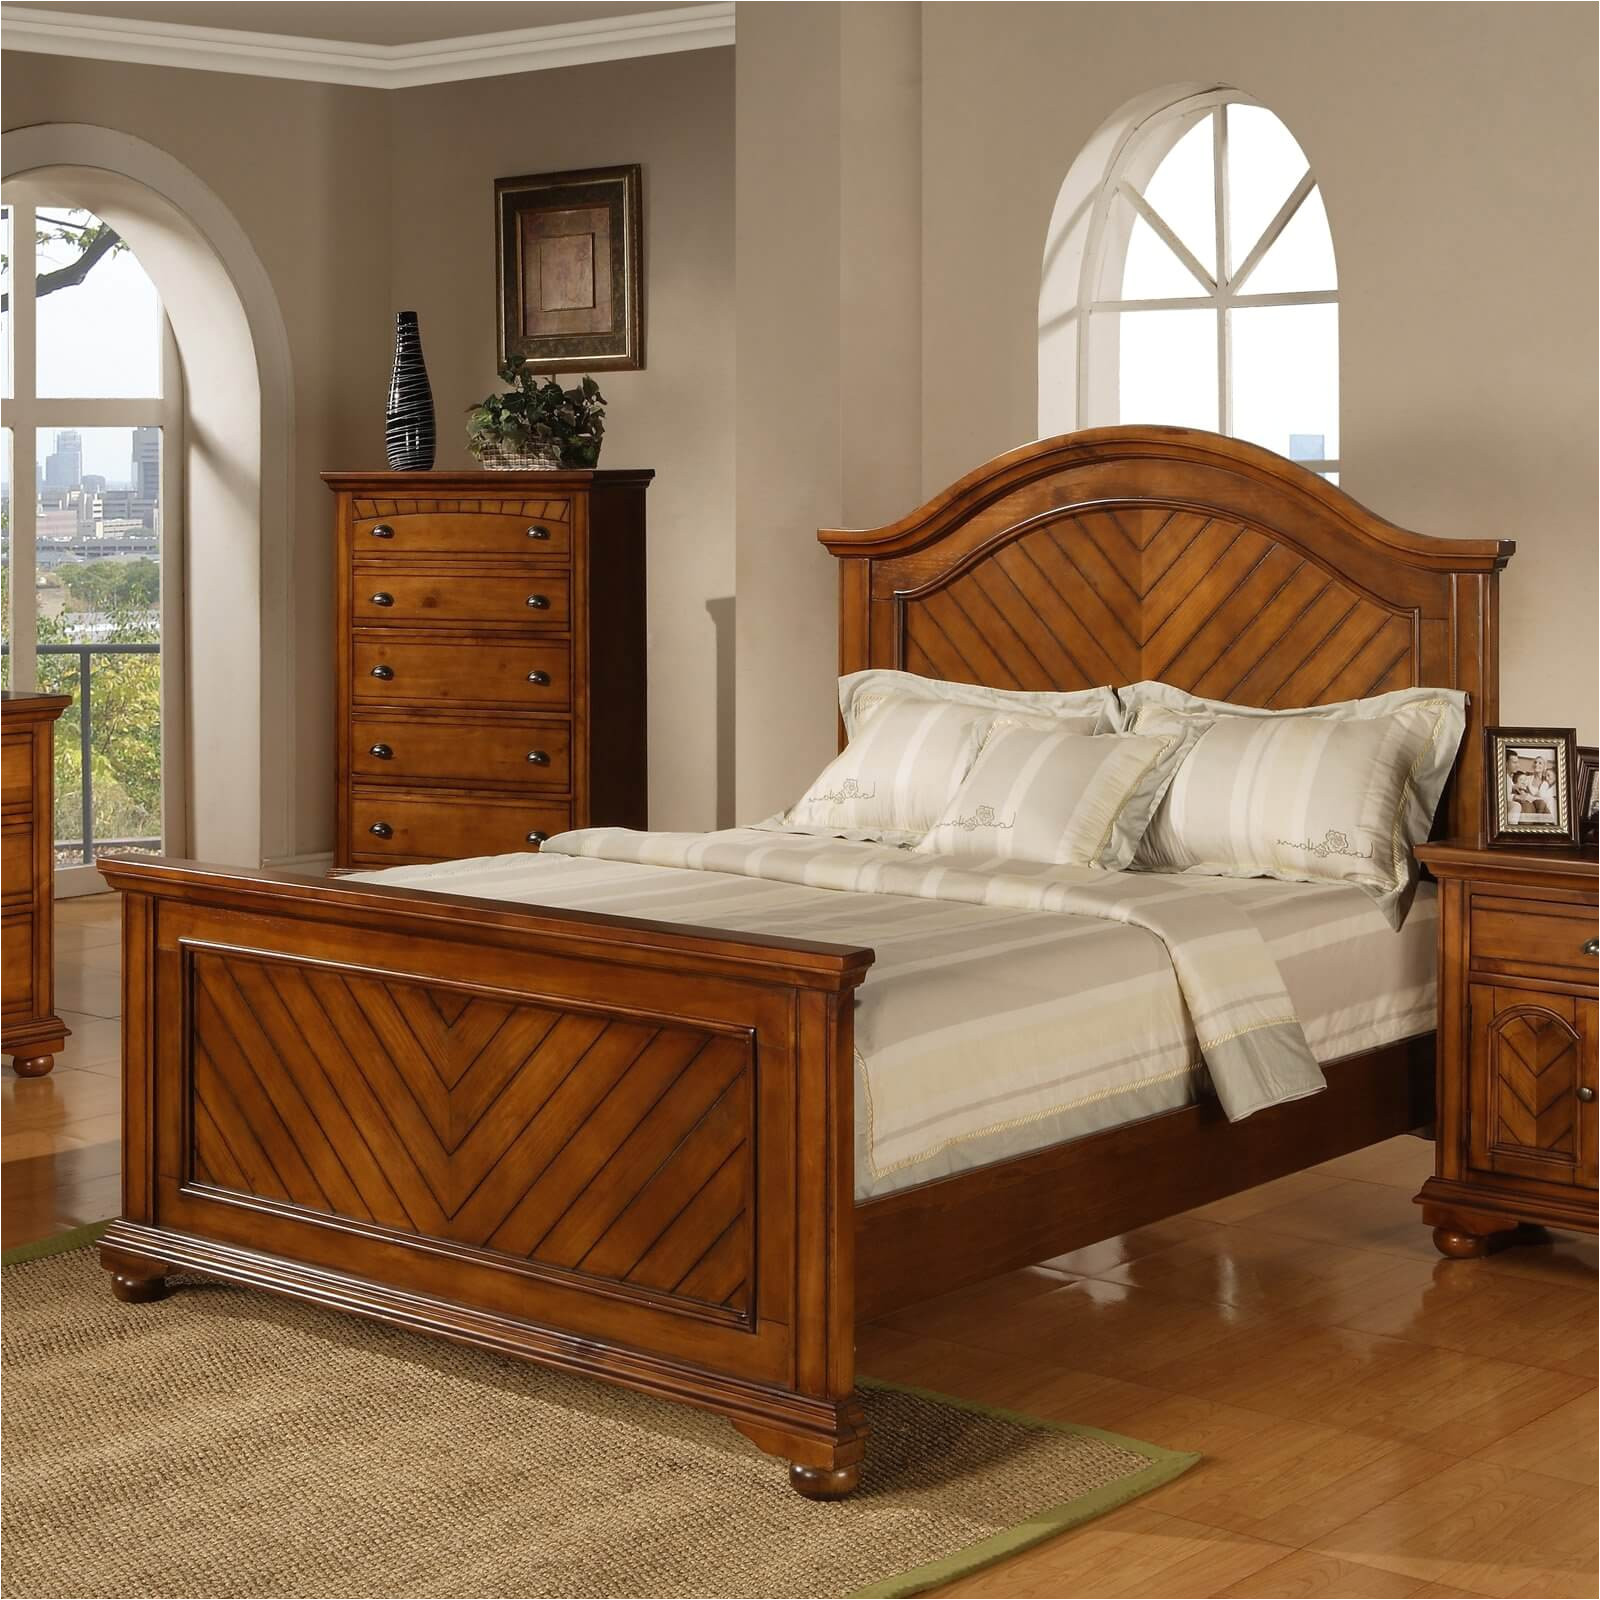 a panel bed consists of a headboard and footboard made from flat panels of wood